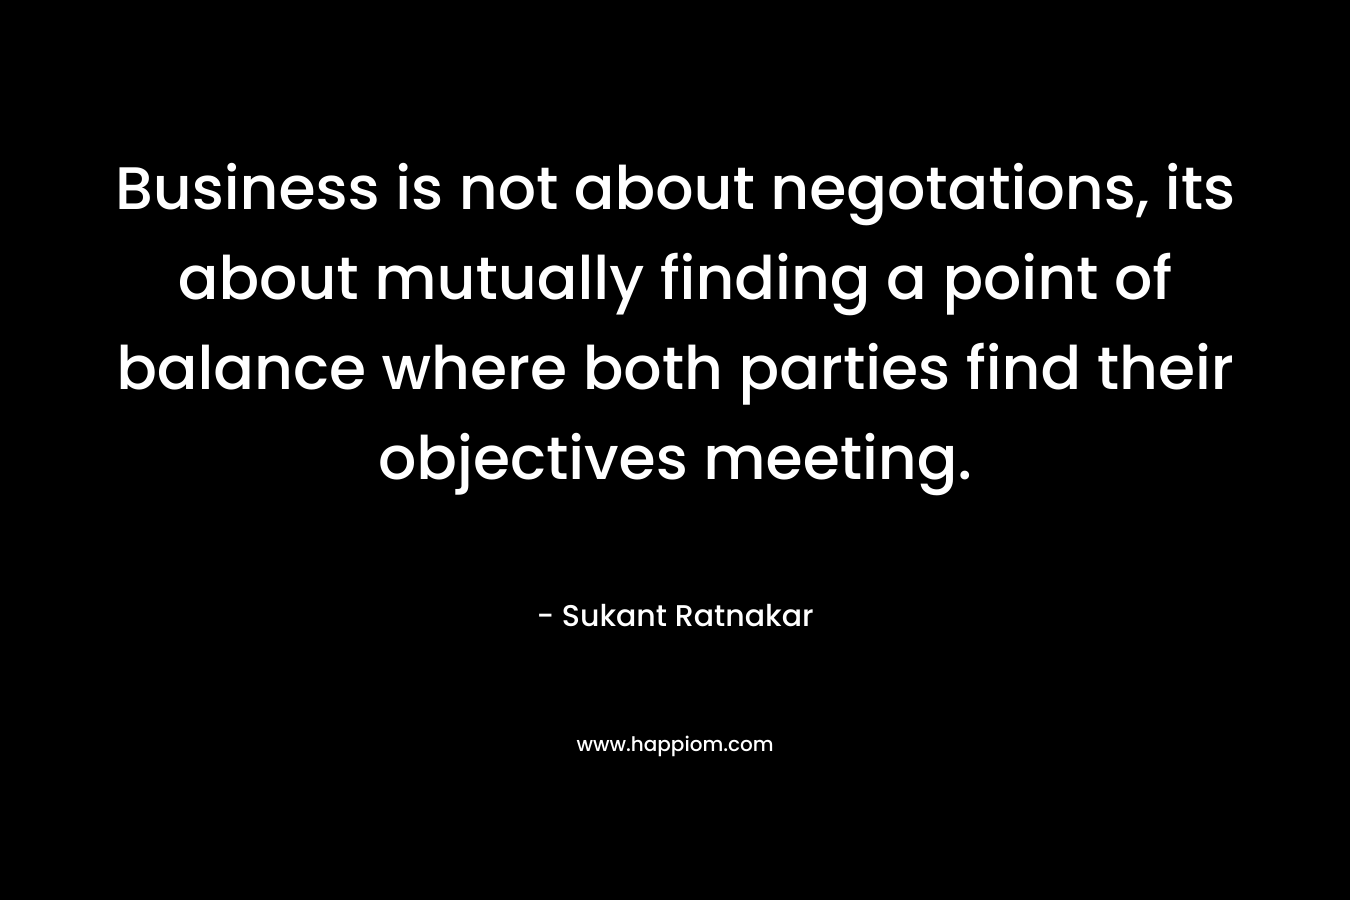 Business is not about negotations, its about mutually finding a point of balance where both parties find their objectives meeting. – Sukant Ratnakar